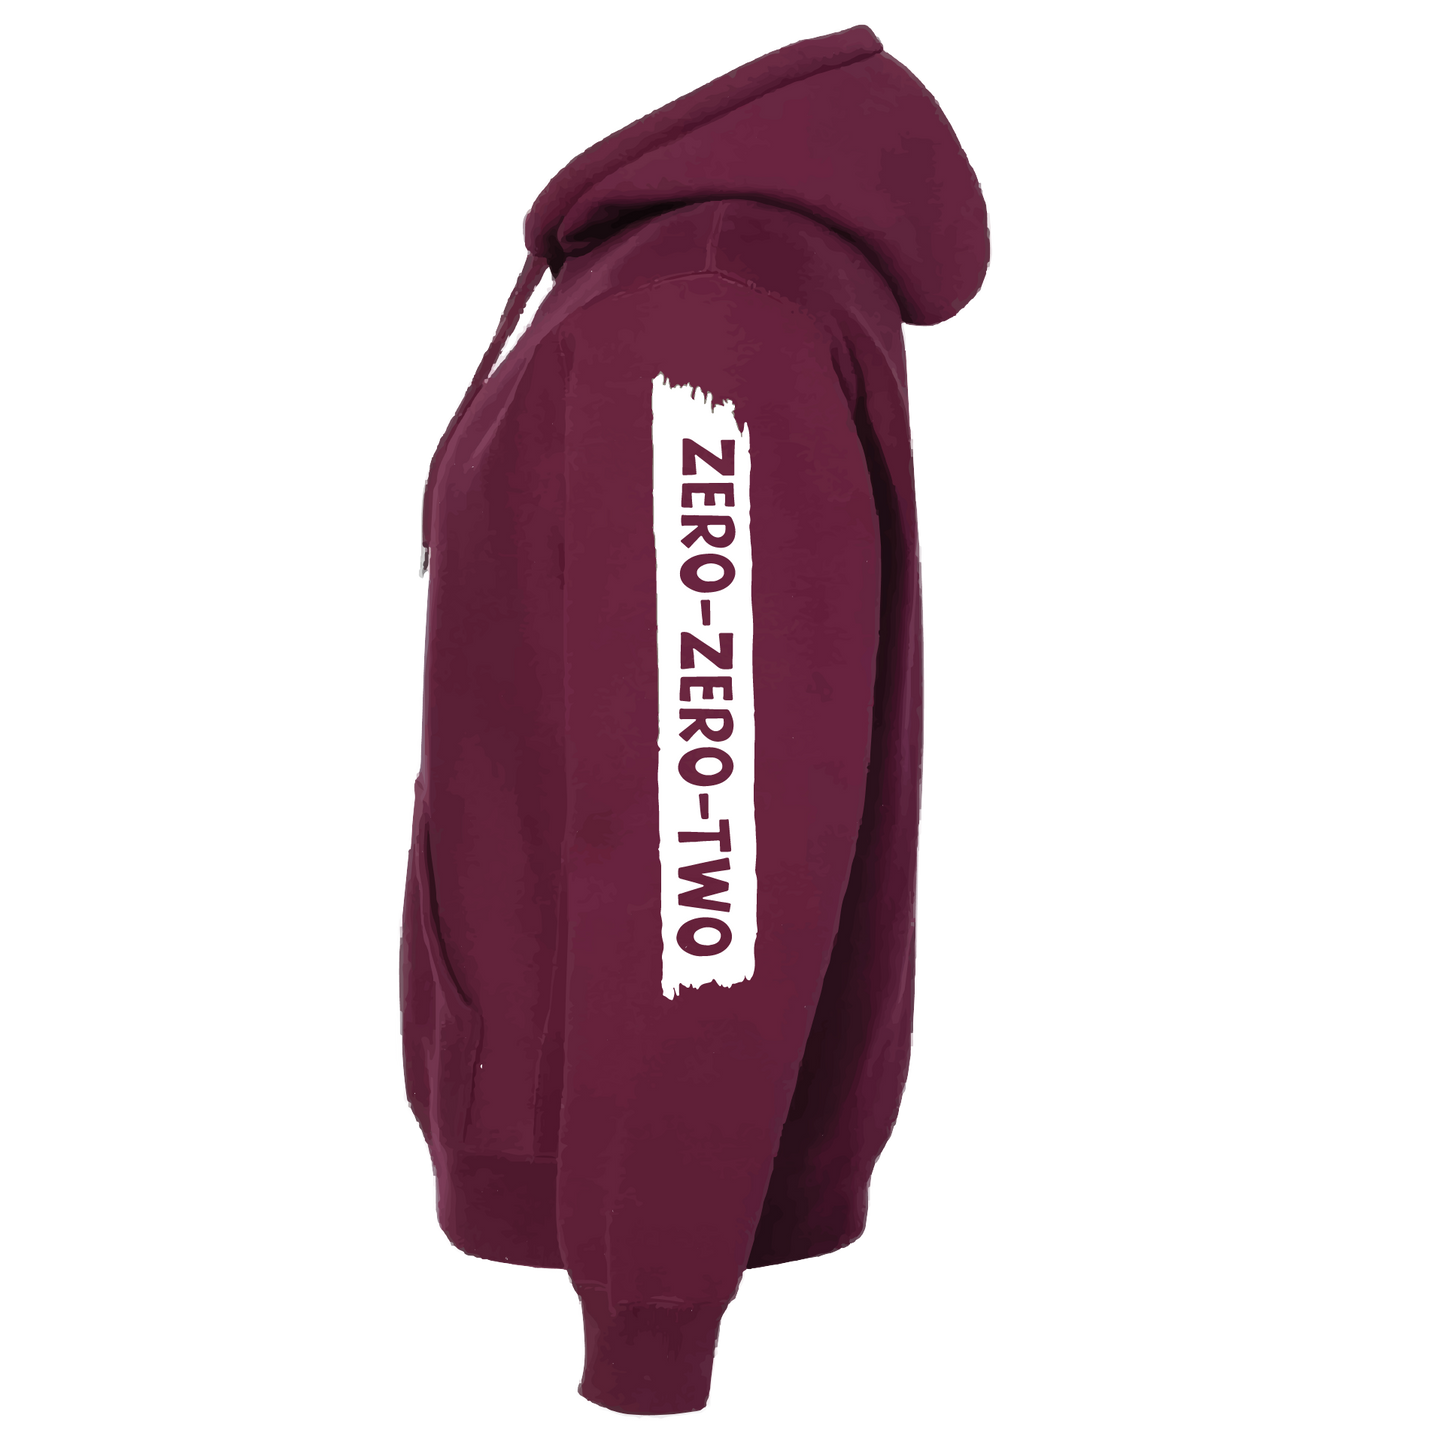 Pickleball Design: Zero Zero Two  Unisex Hooded Sweatshirt: Moisture-wicking, double-lined hood, front pouch pocket.  This unisex hooded sweatshirt is ultra comfortable and soft. Stay warm on the Pickleball courts while being that hit with this one of kind design.